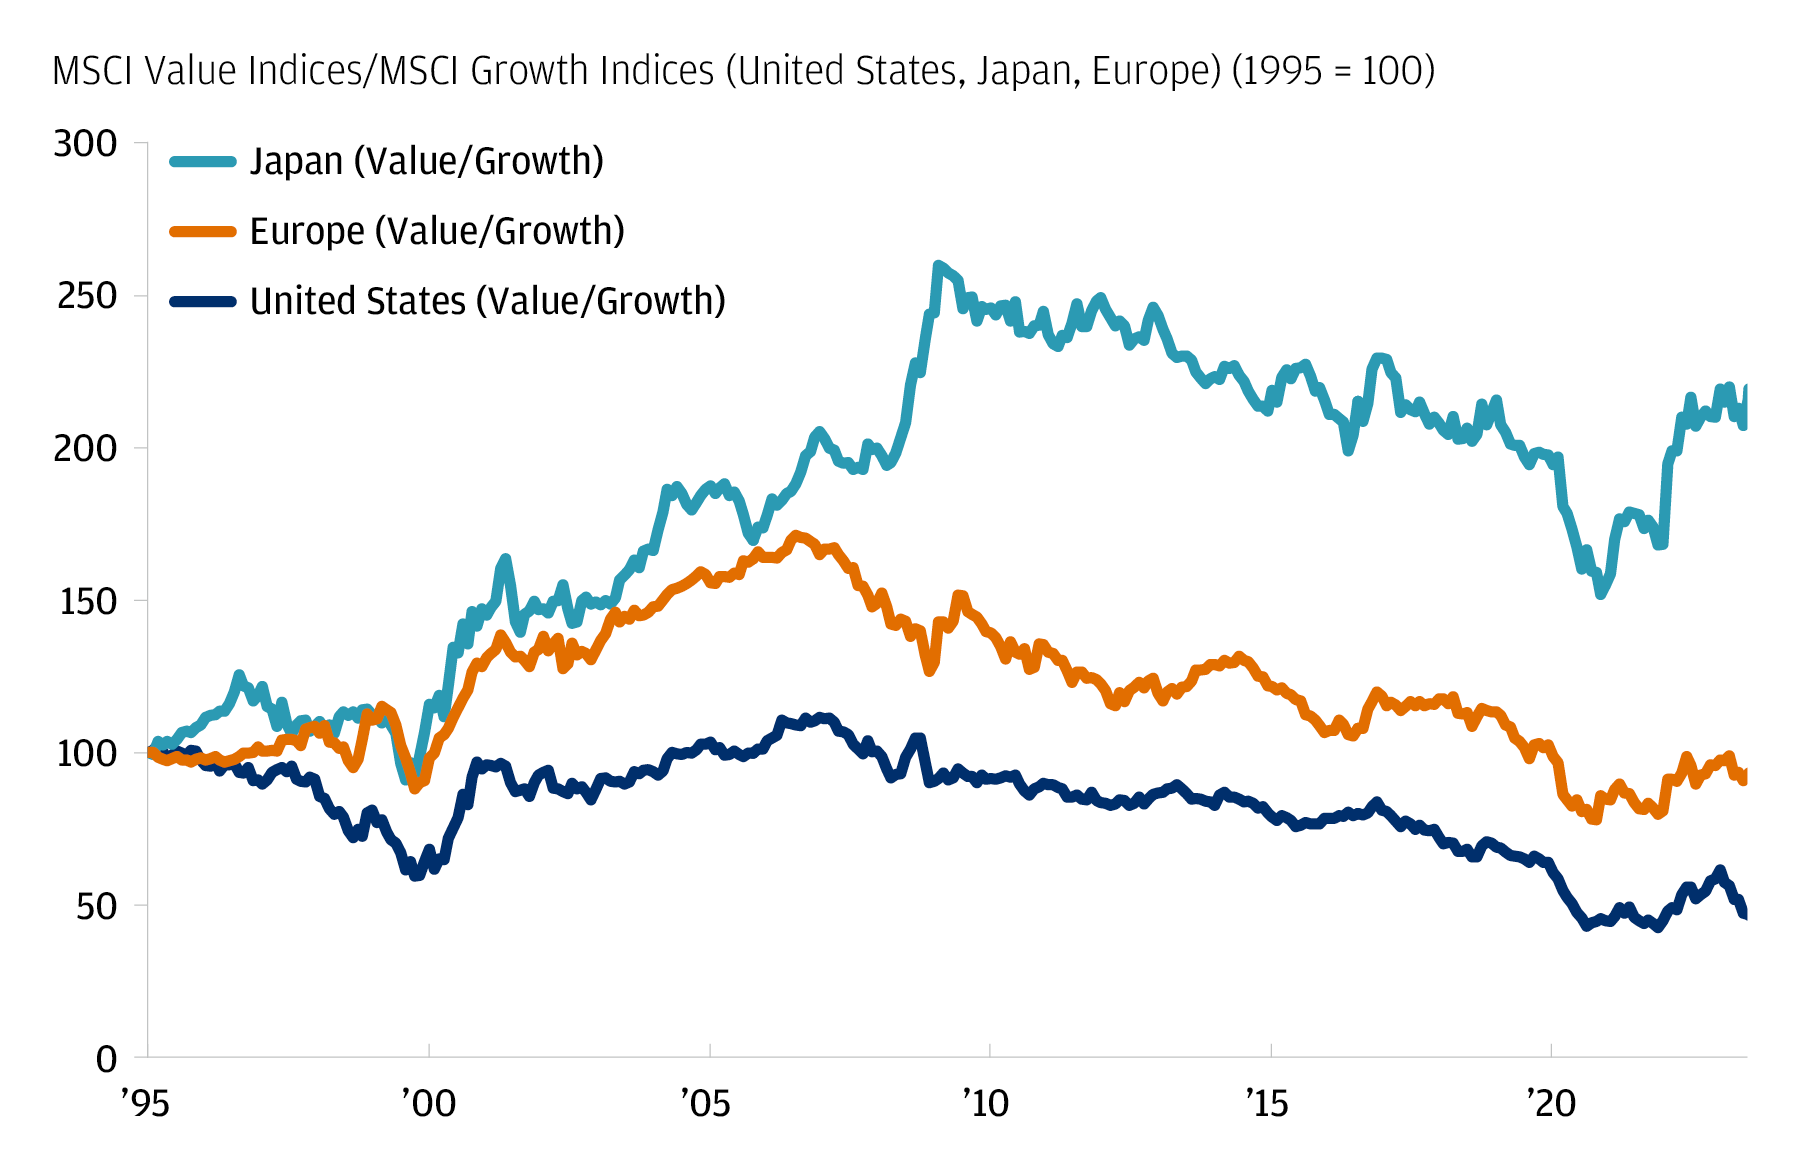 The chart describes the MSCI Value indices/ MSCI Growth indices (U.S., Japan, Europe) (1995=100).